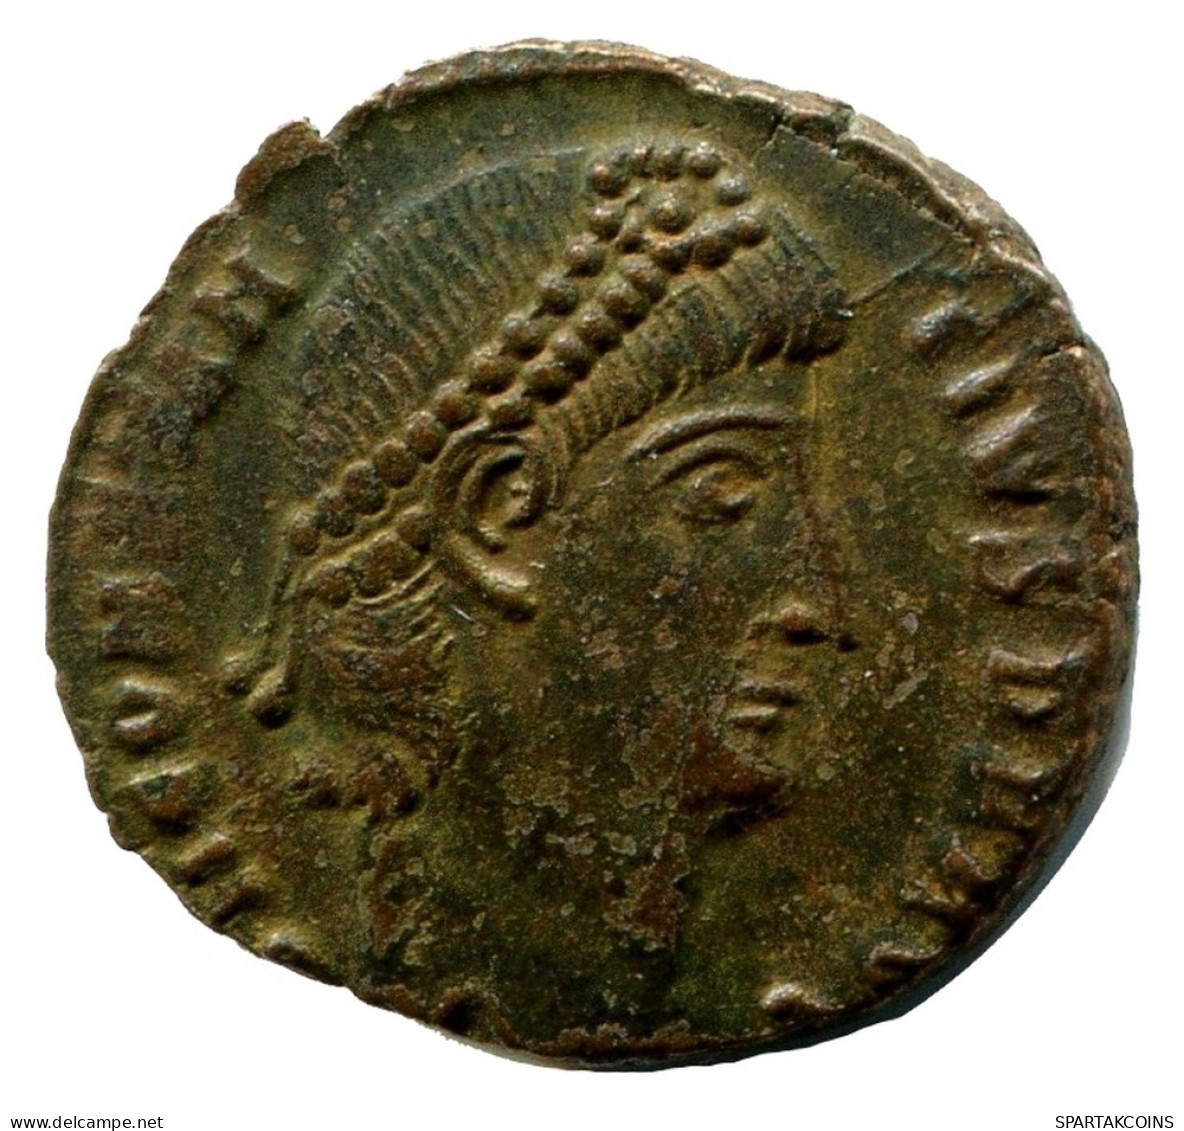 CONSTANTIUS II MINTED IN ANTIOCH FOUND IN IHNASYAH HOARD EGYPT #ANC11228.14.D.A - The Christian Empire (307 AD To 363 AD)